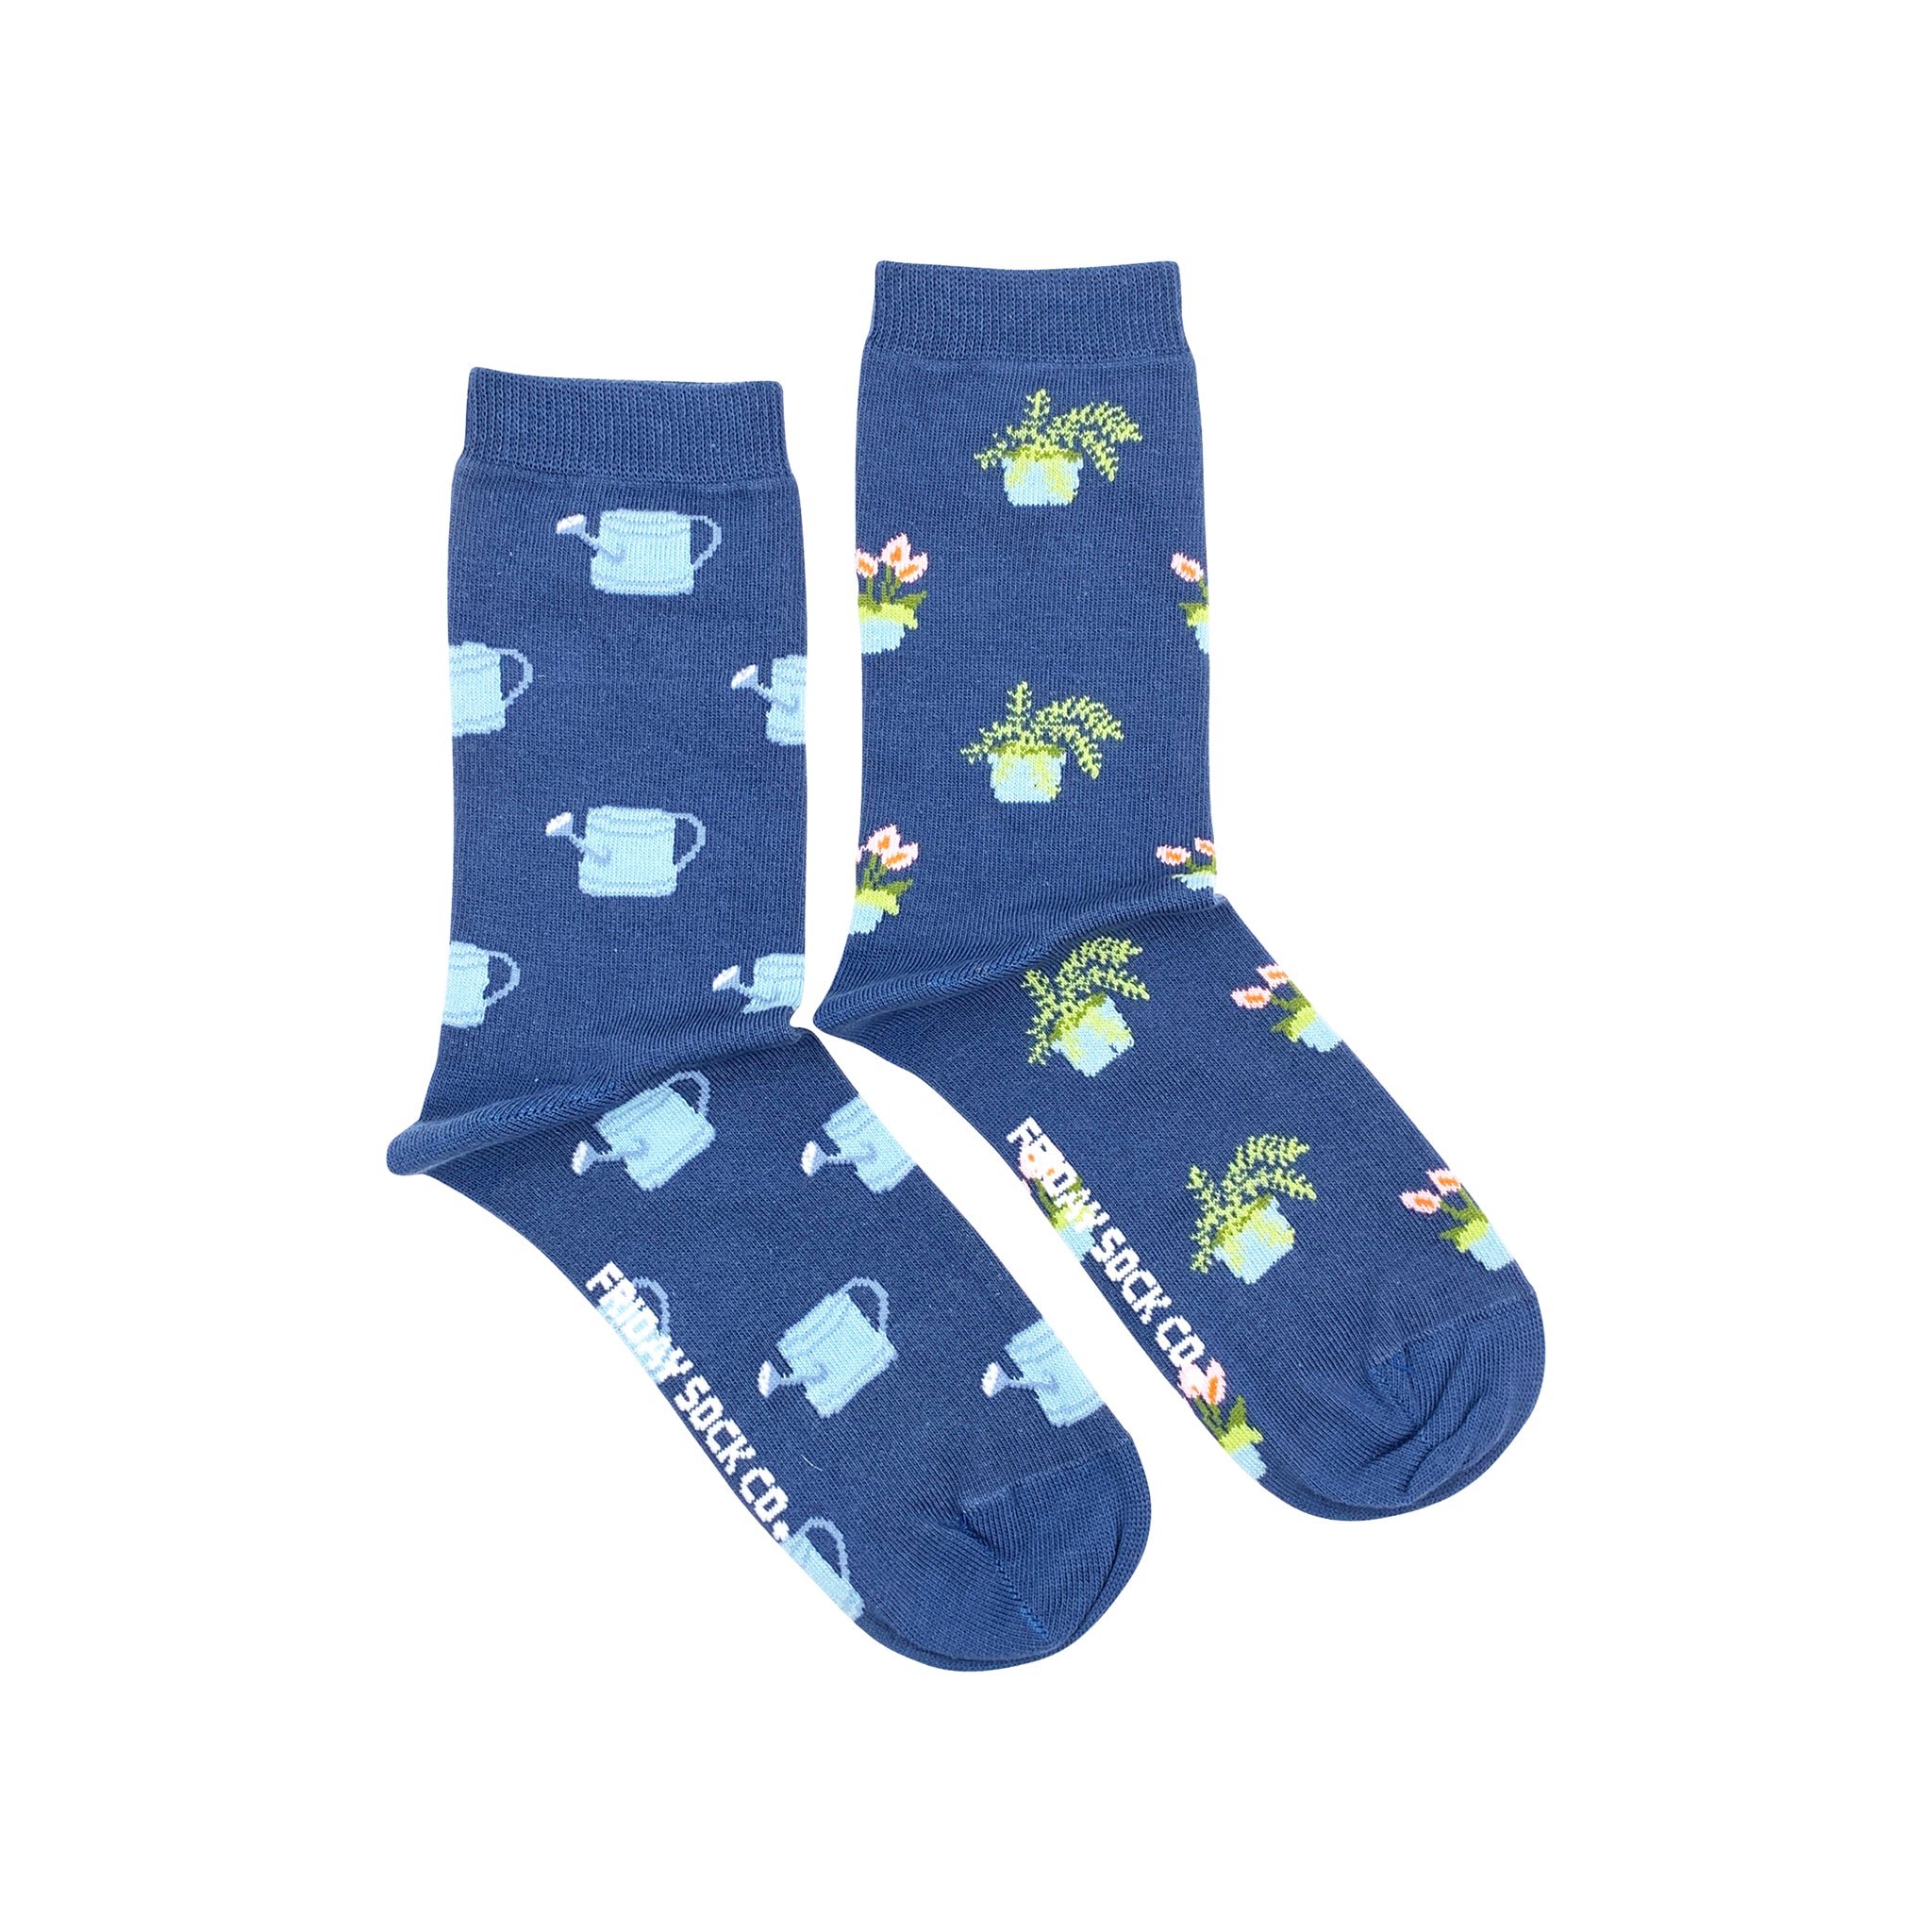 Women's Plant & Watering Can Socks | Mismatched by Design | Friday Sock Co.